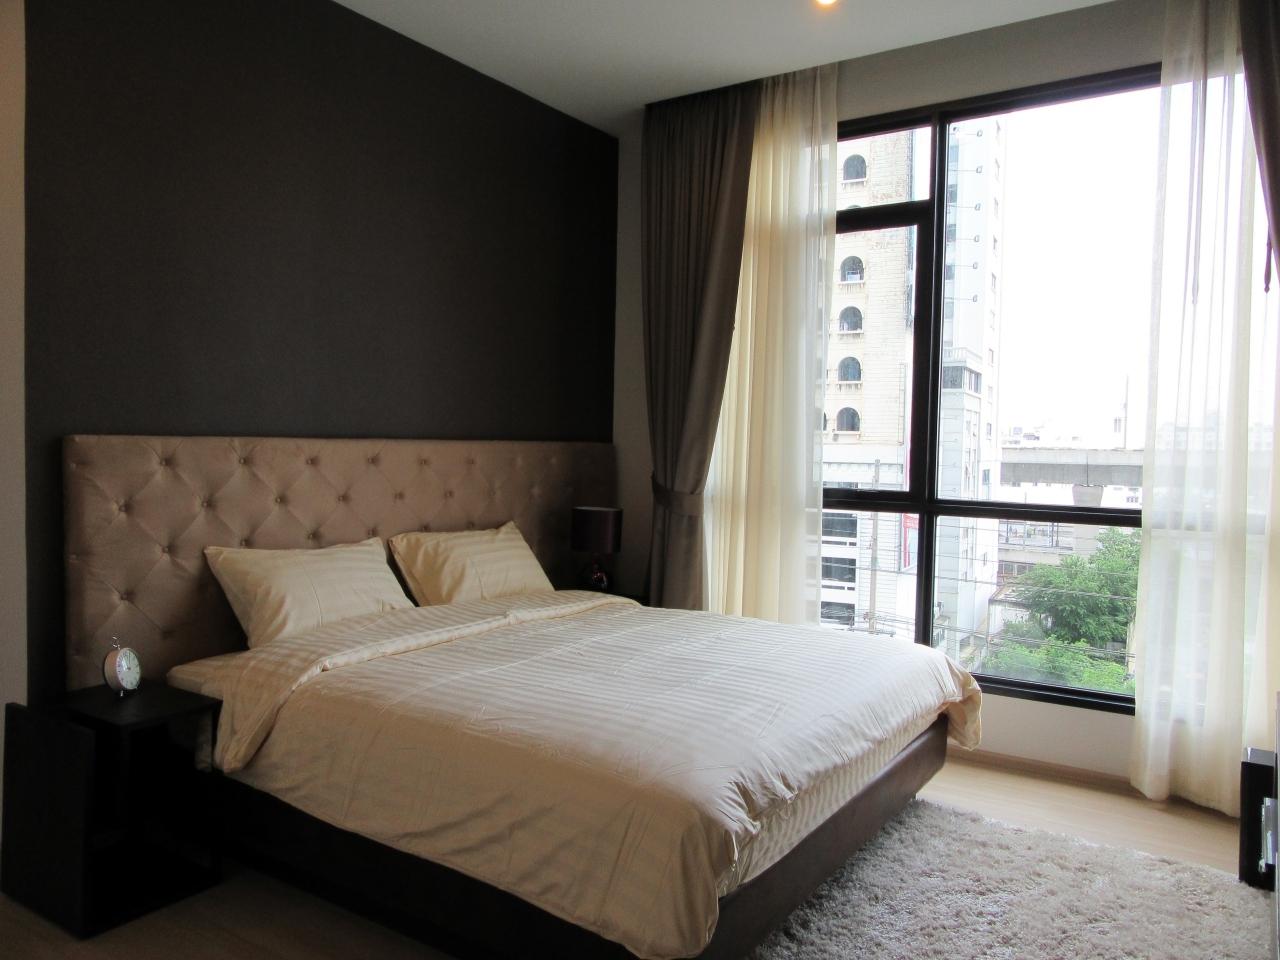  SALE  The Capital Ekamai-Thonglor 27 M฿  RENT 150,000 ฿**Available in the beginning of MAY 2019 รูปที่ 1